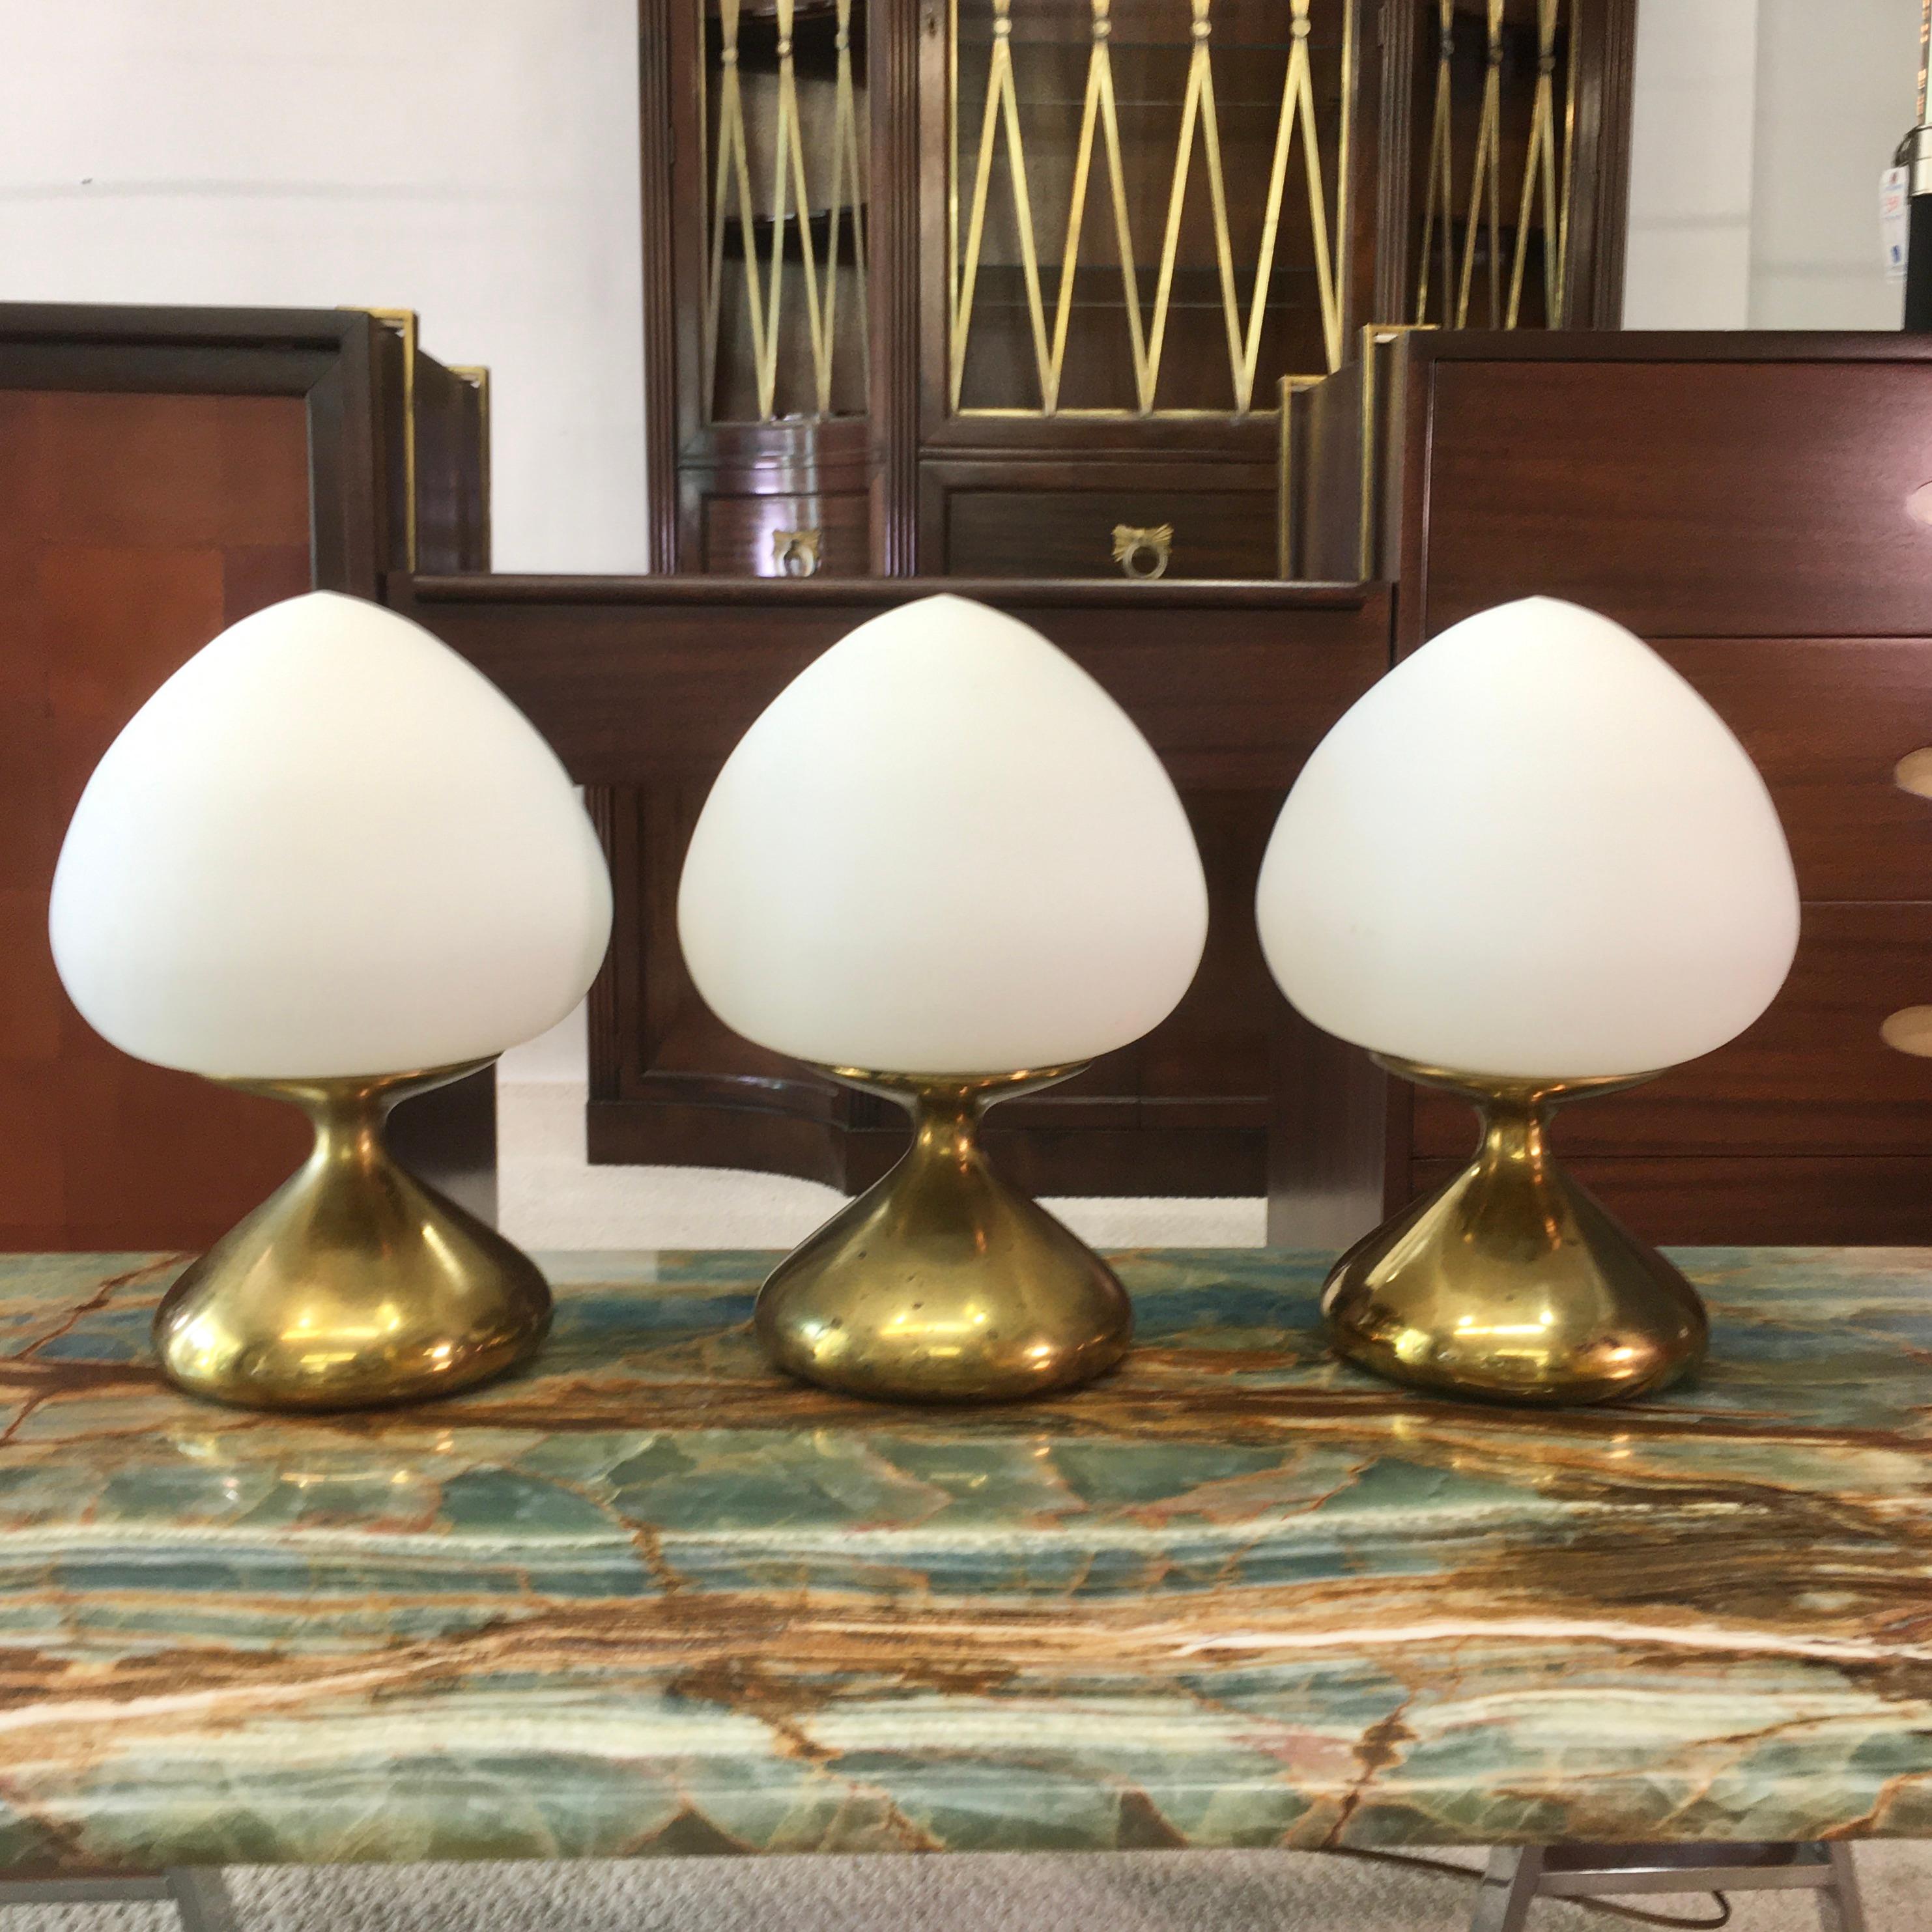 Three exceedingly rare table lamps designed by Tony Paul for Westwood Industries, circa 1965. Brass finished cast metal base with original satin opaline glass mushroom/acorn shaped globes. See original vintage Tony Paul/Westwood catalog page for